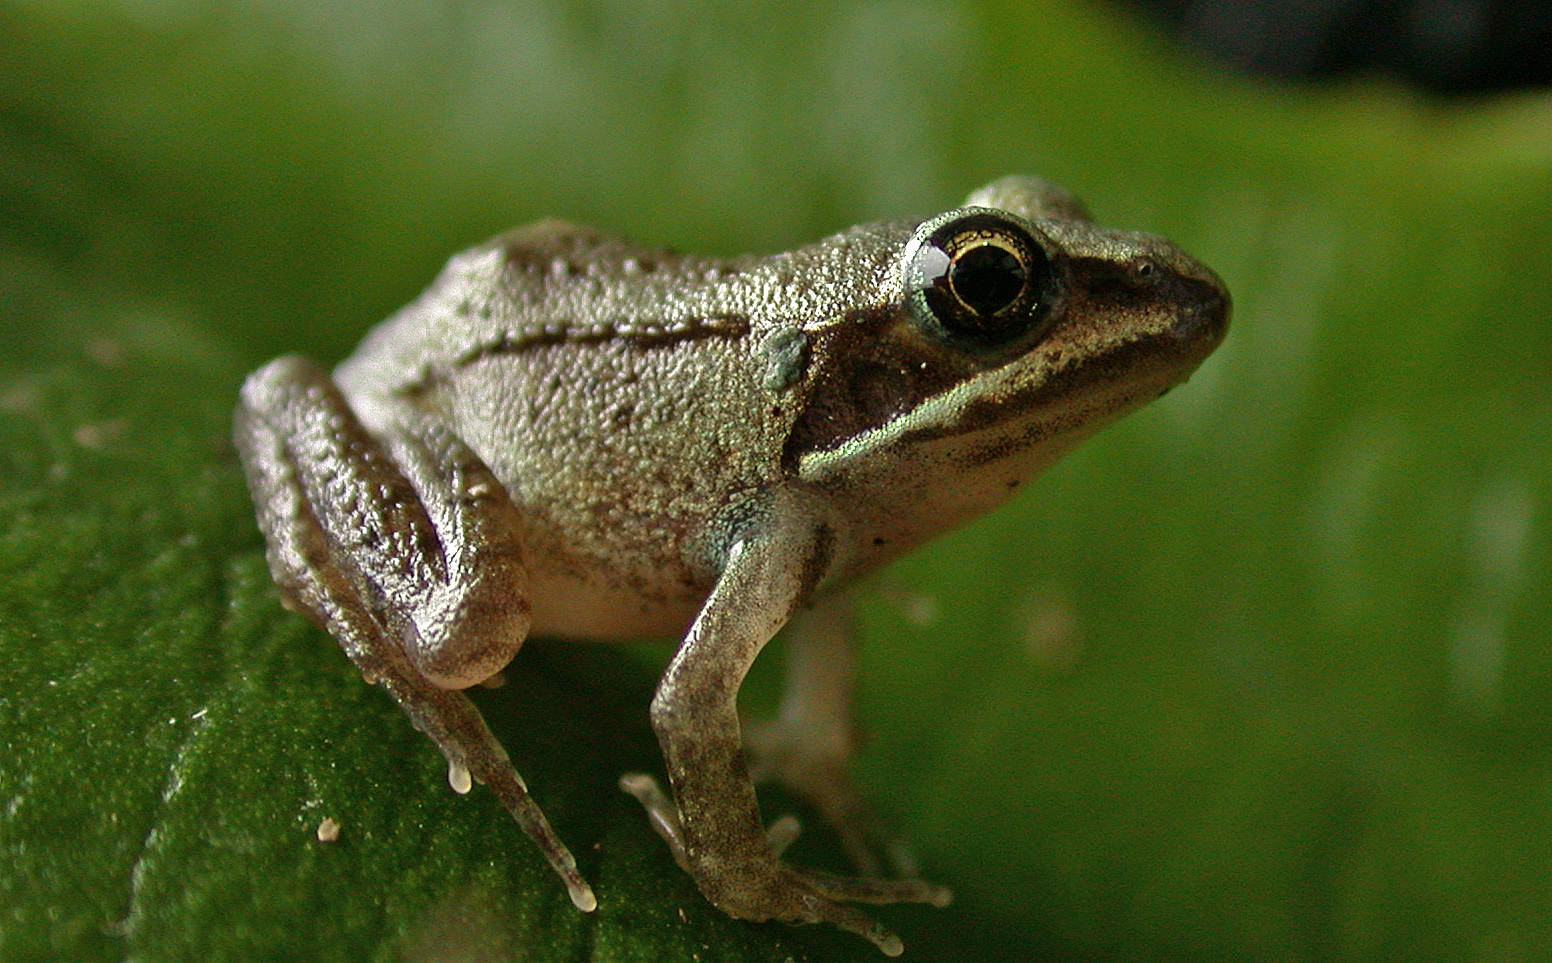 A young wood frog, with the typical black eye mask. (Photo by Bob Armstrong)